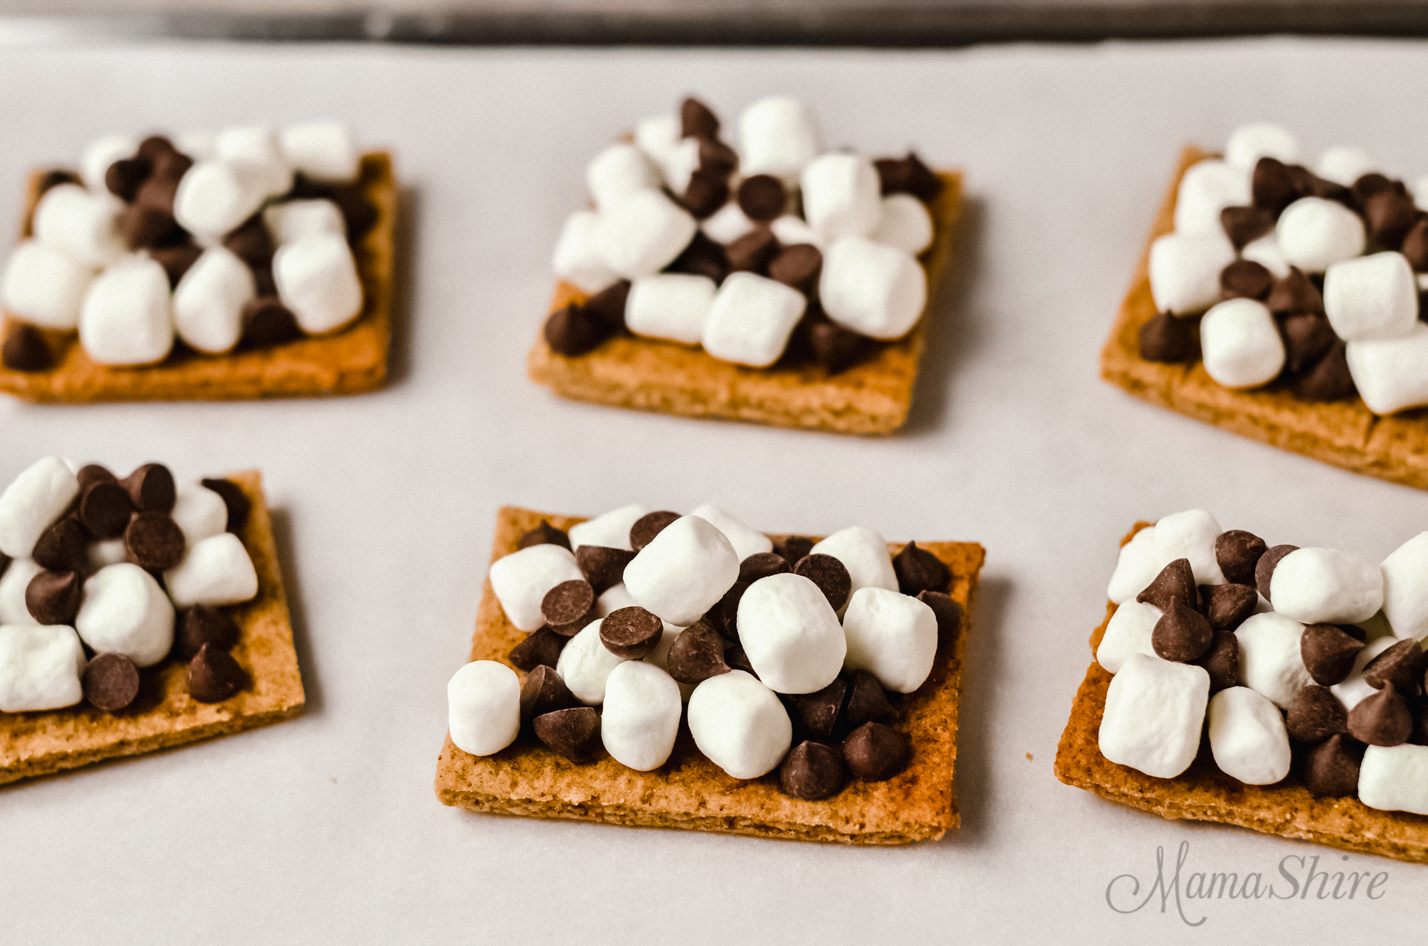 Chocolate chips and mini marshmallows on top of a gluten-free graham cracker.